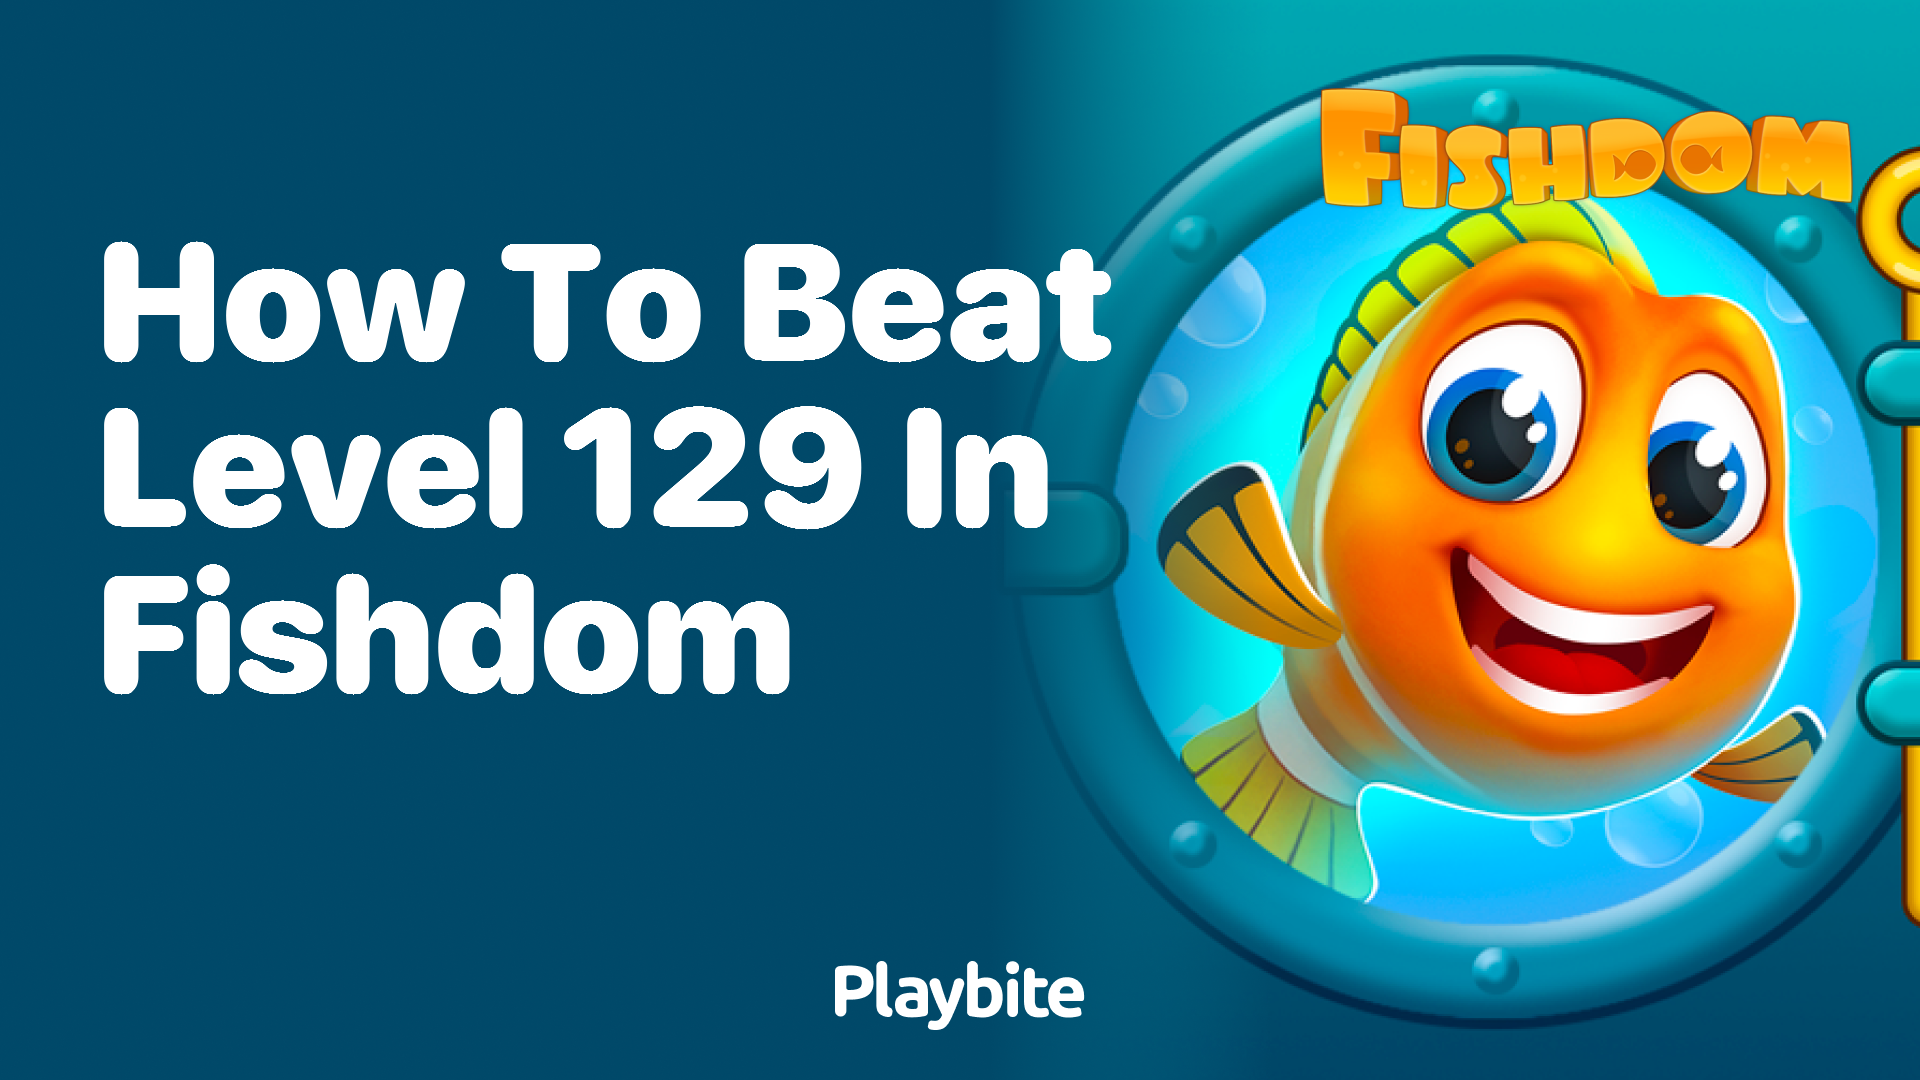 How to Beat Level 129 in Fishdom: Strategies and Tips